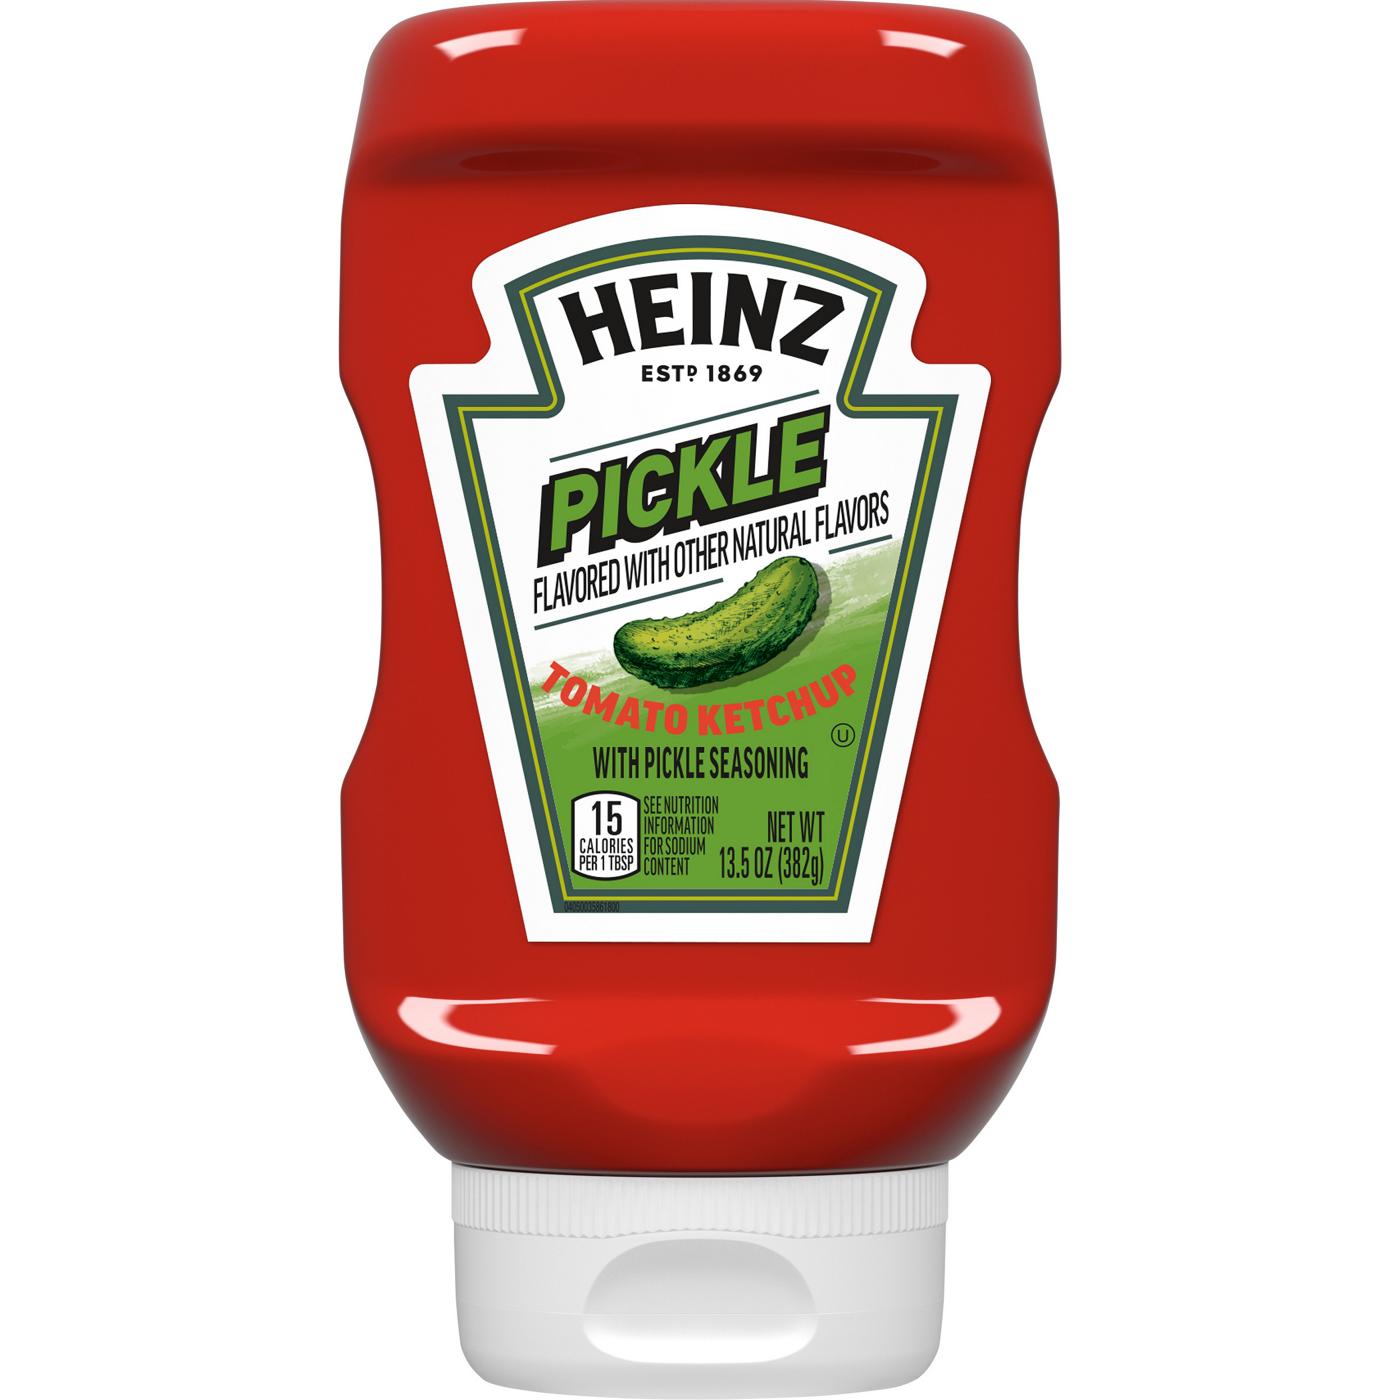 Heinz Pickle Flavored Tomato Ketchup; image 1 of 3